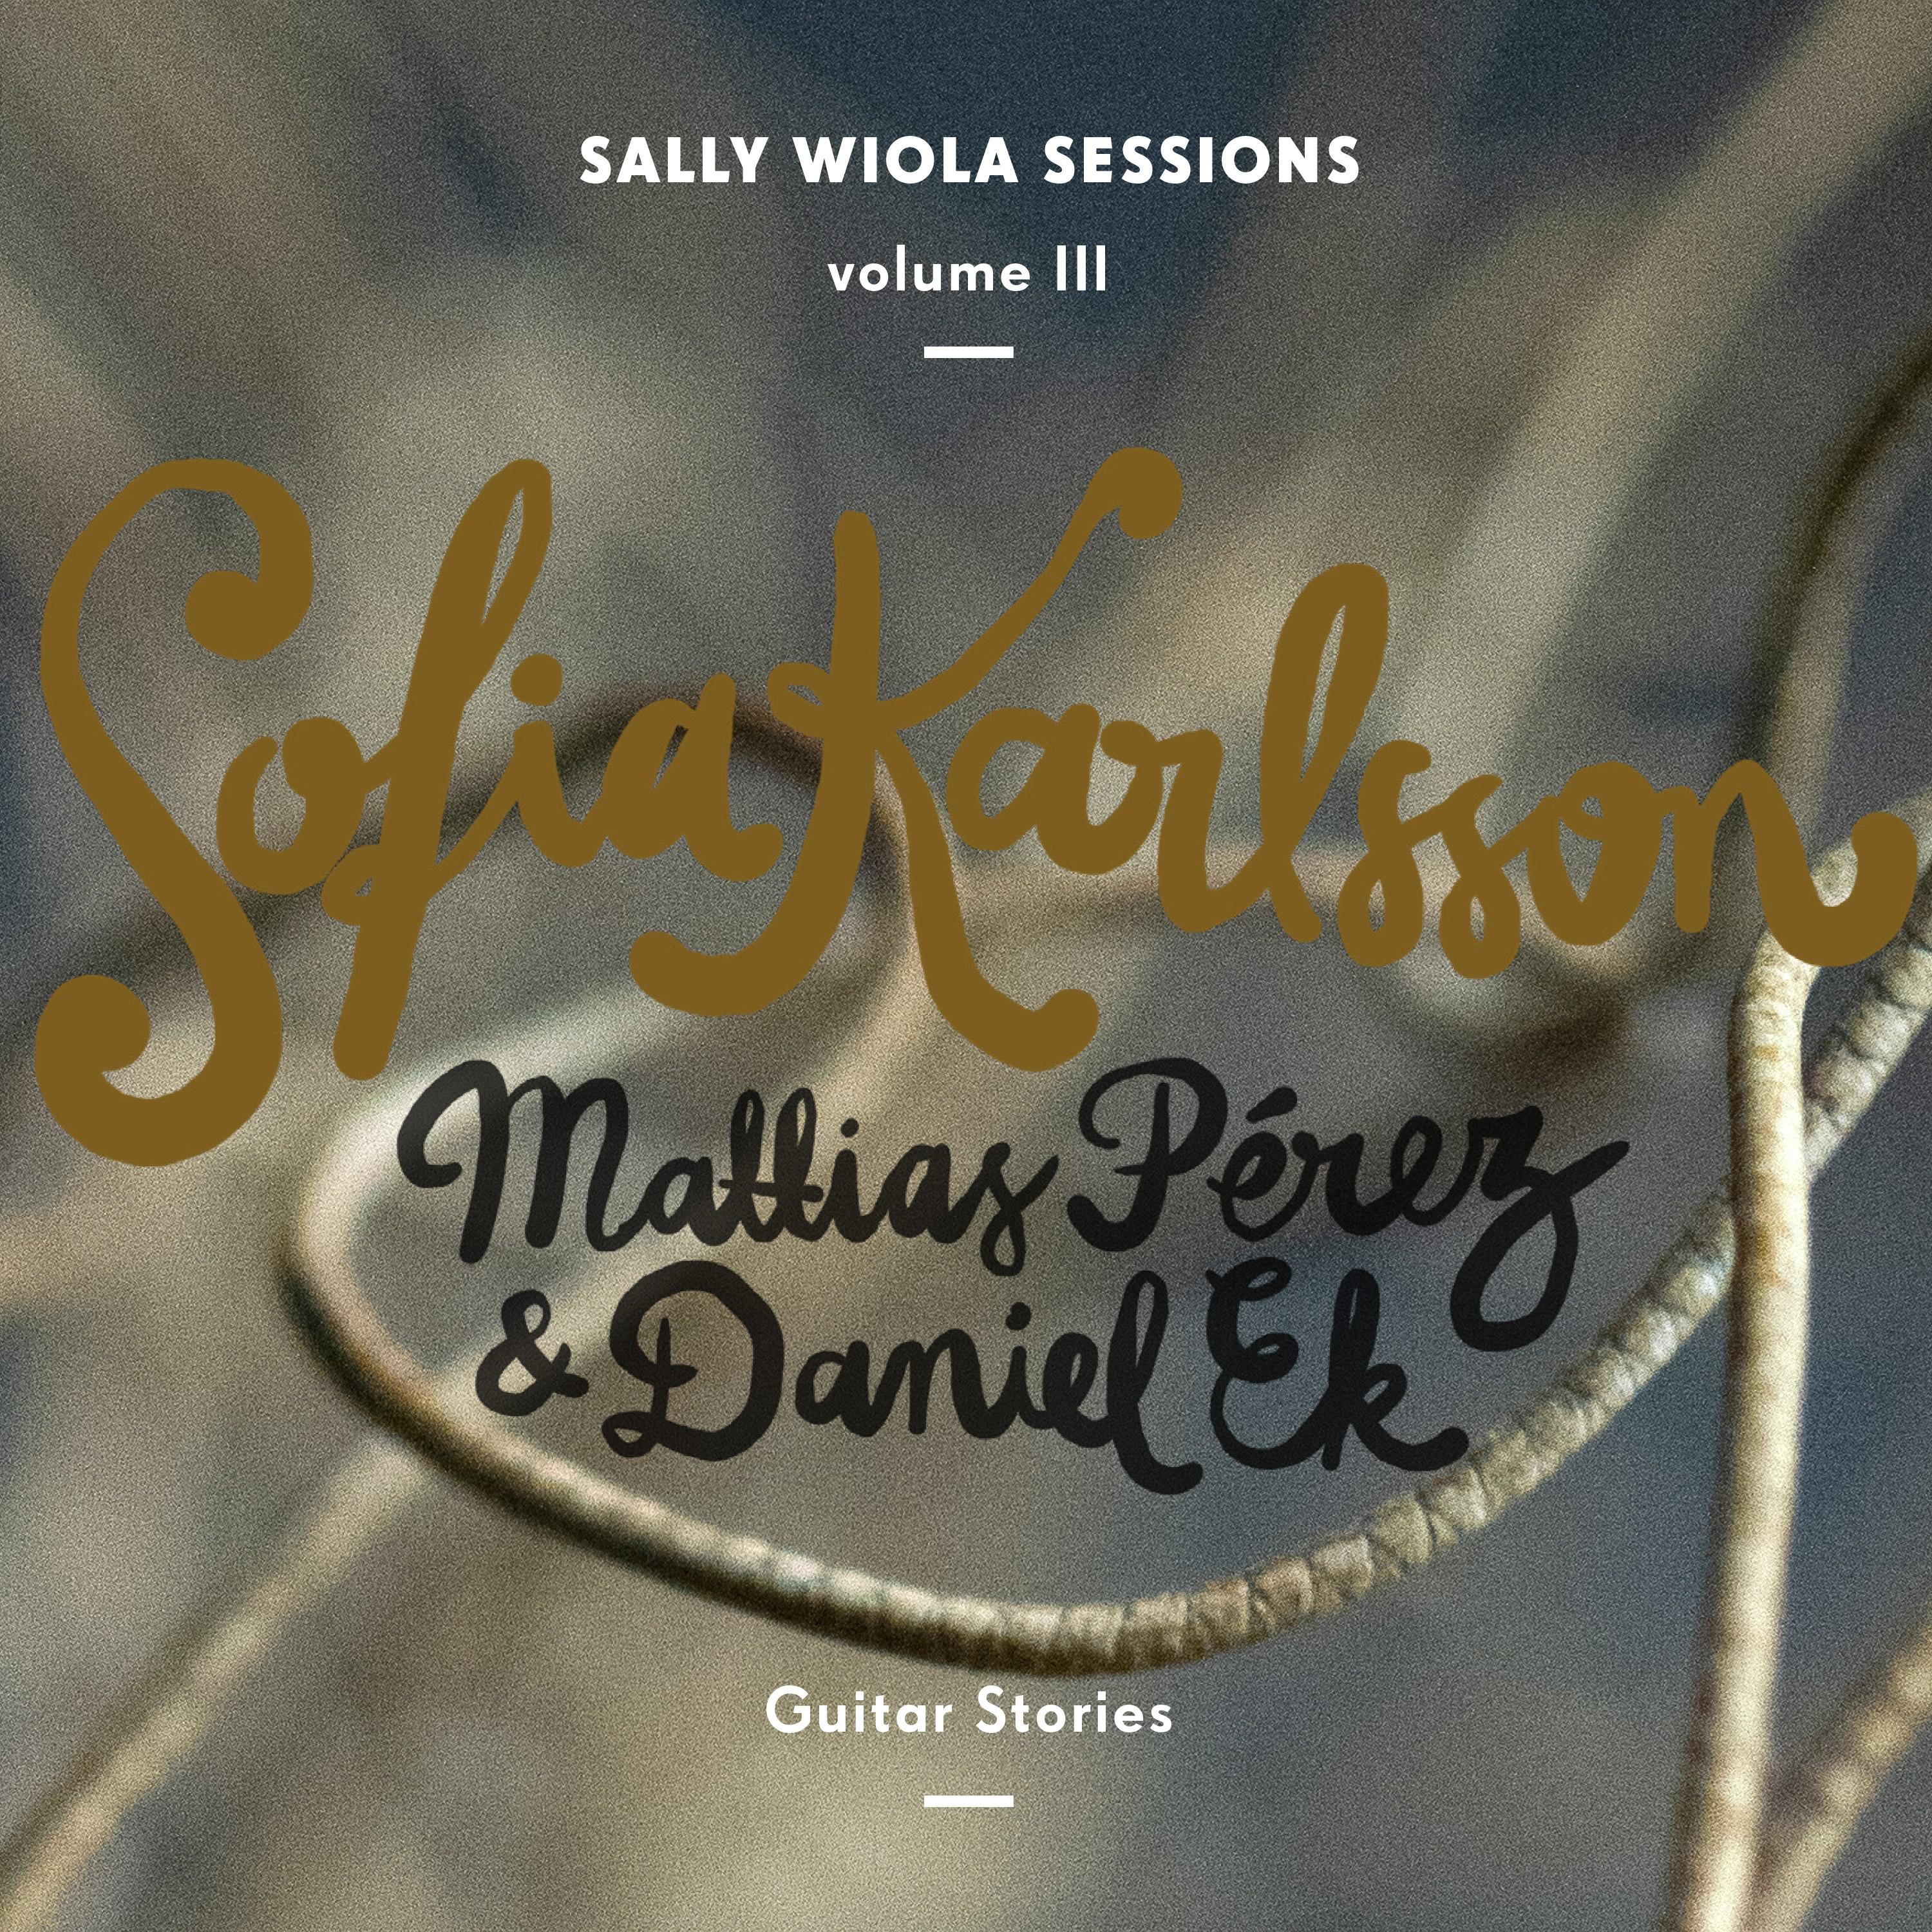 Guitar Stories (Sally Wiola Sessions, Vol. III)